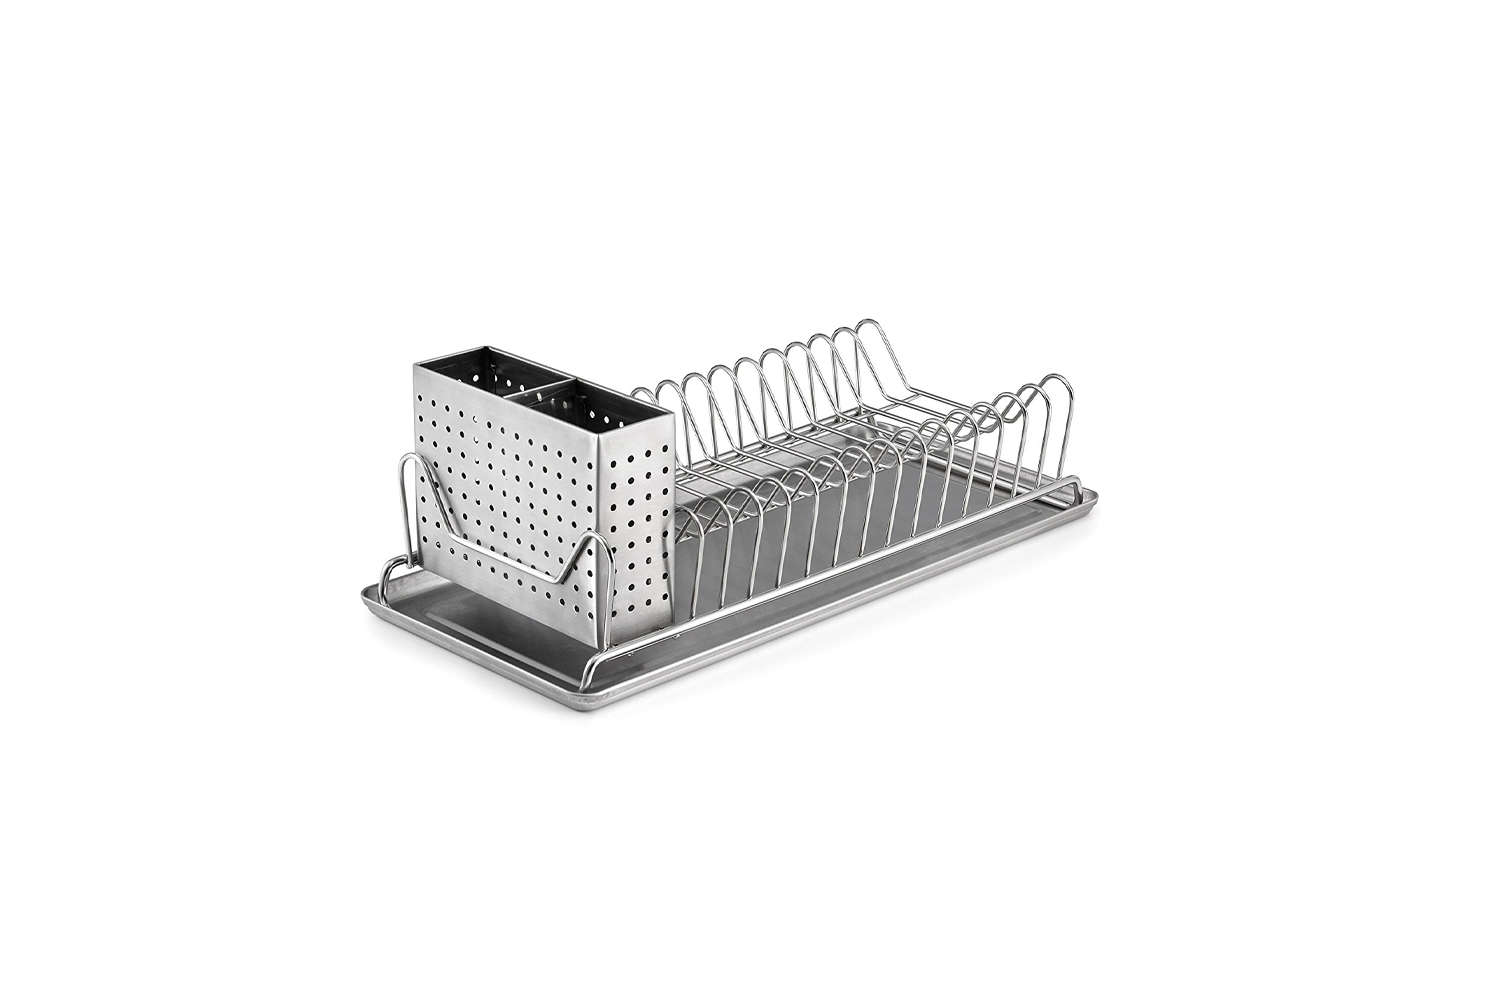 Dish Racks for Small Spaces